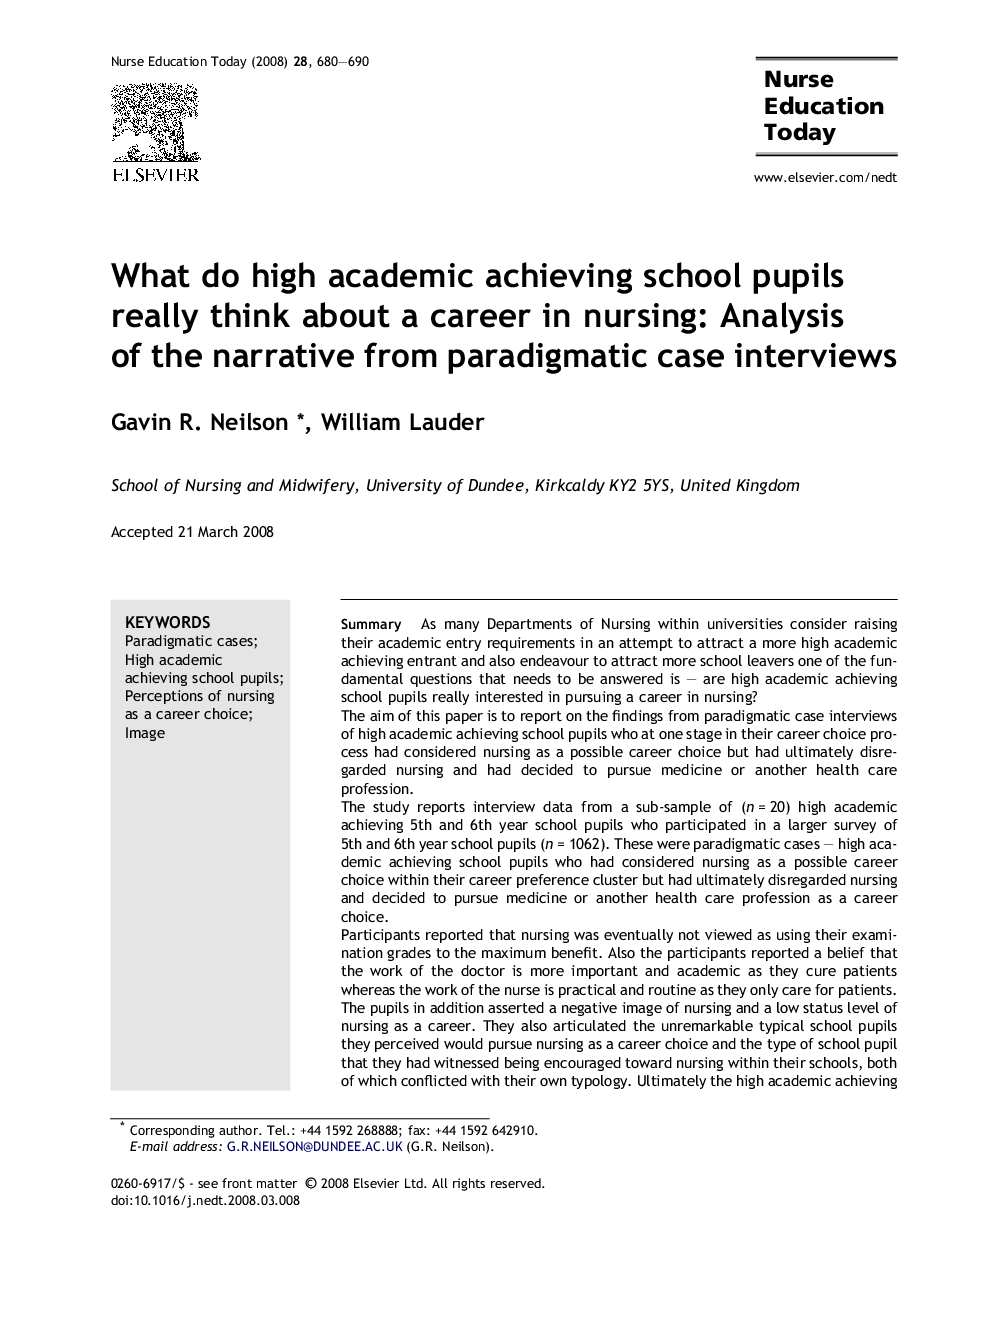 What do high academic achieving school pupils really think about a career in nursing: Analysis of the narrative from paradigmatic case interviews